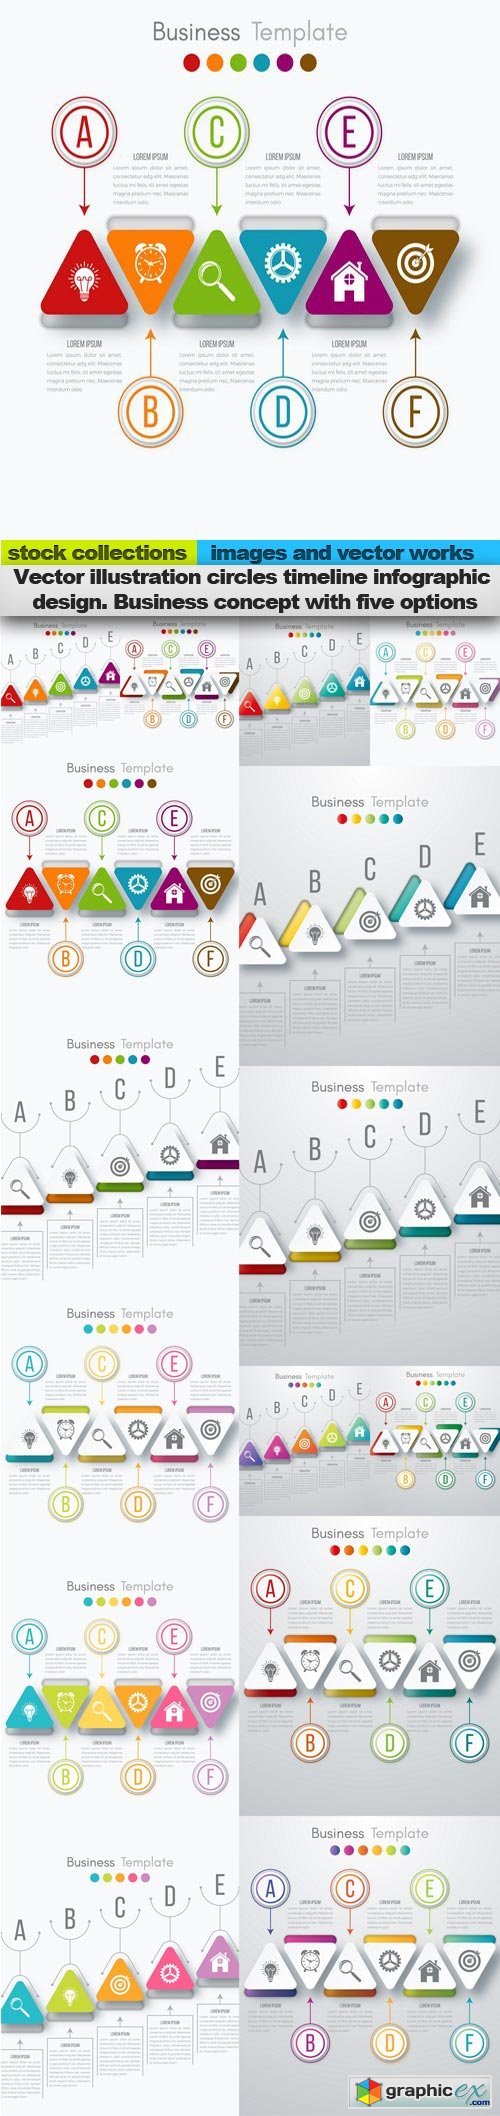 illustration circles timeline infographic design. Business concept with five options, 15 x EPS